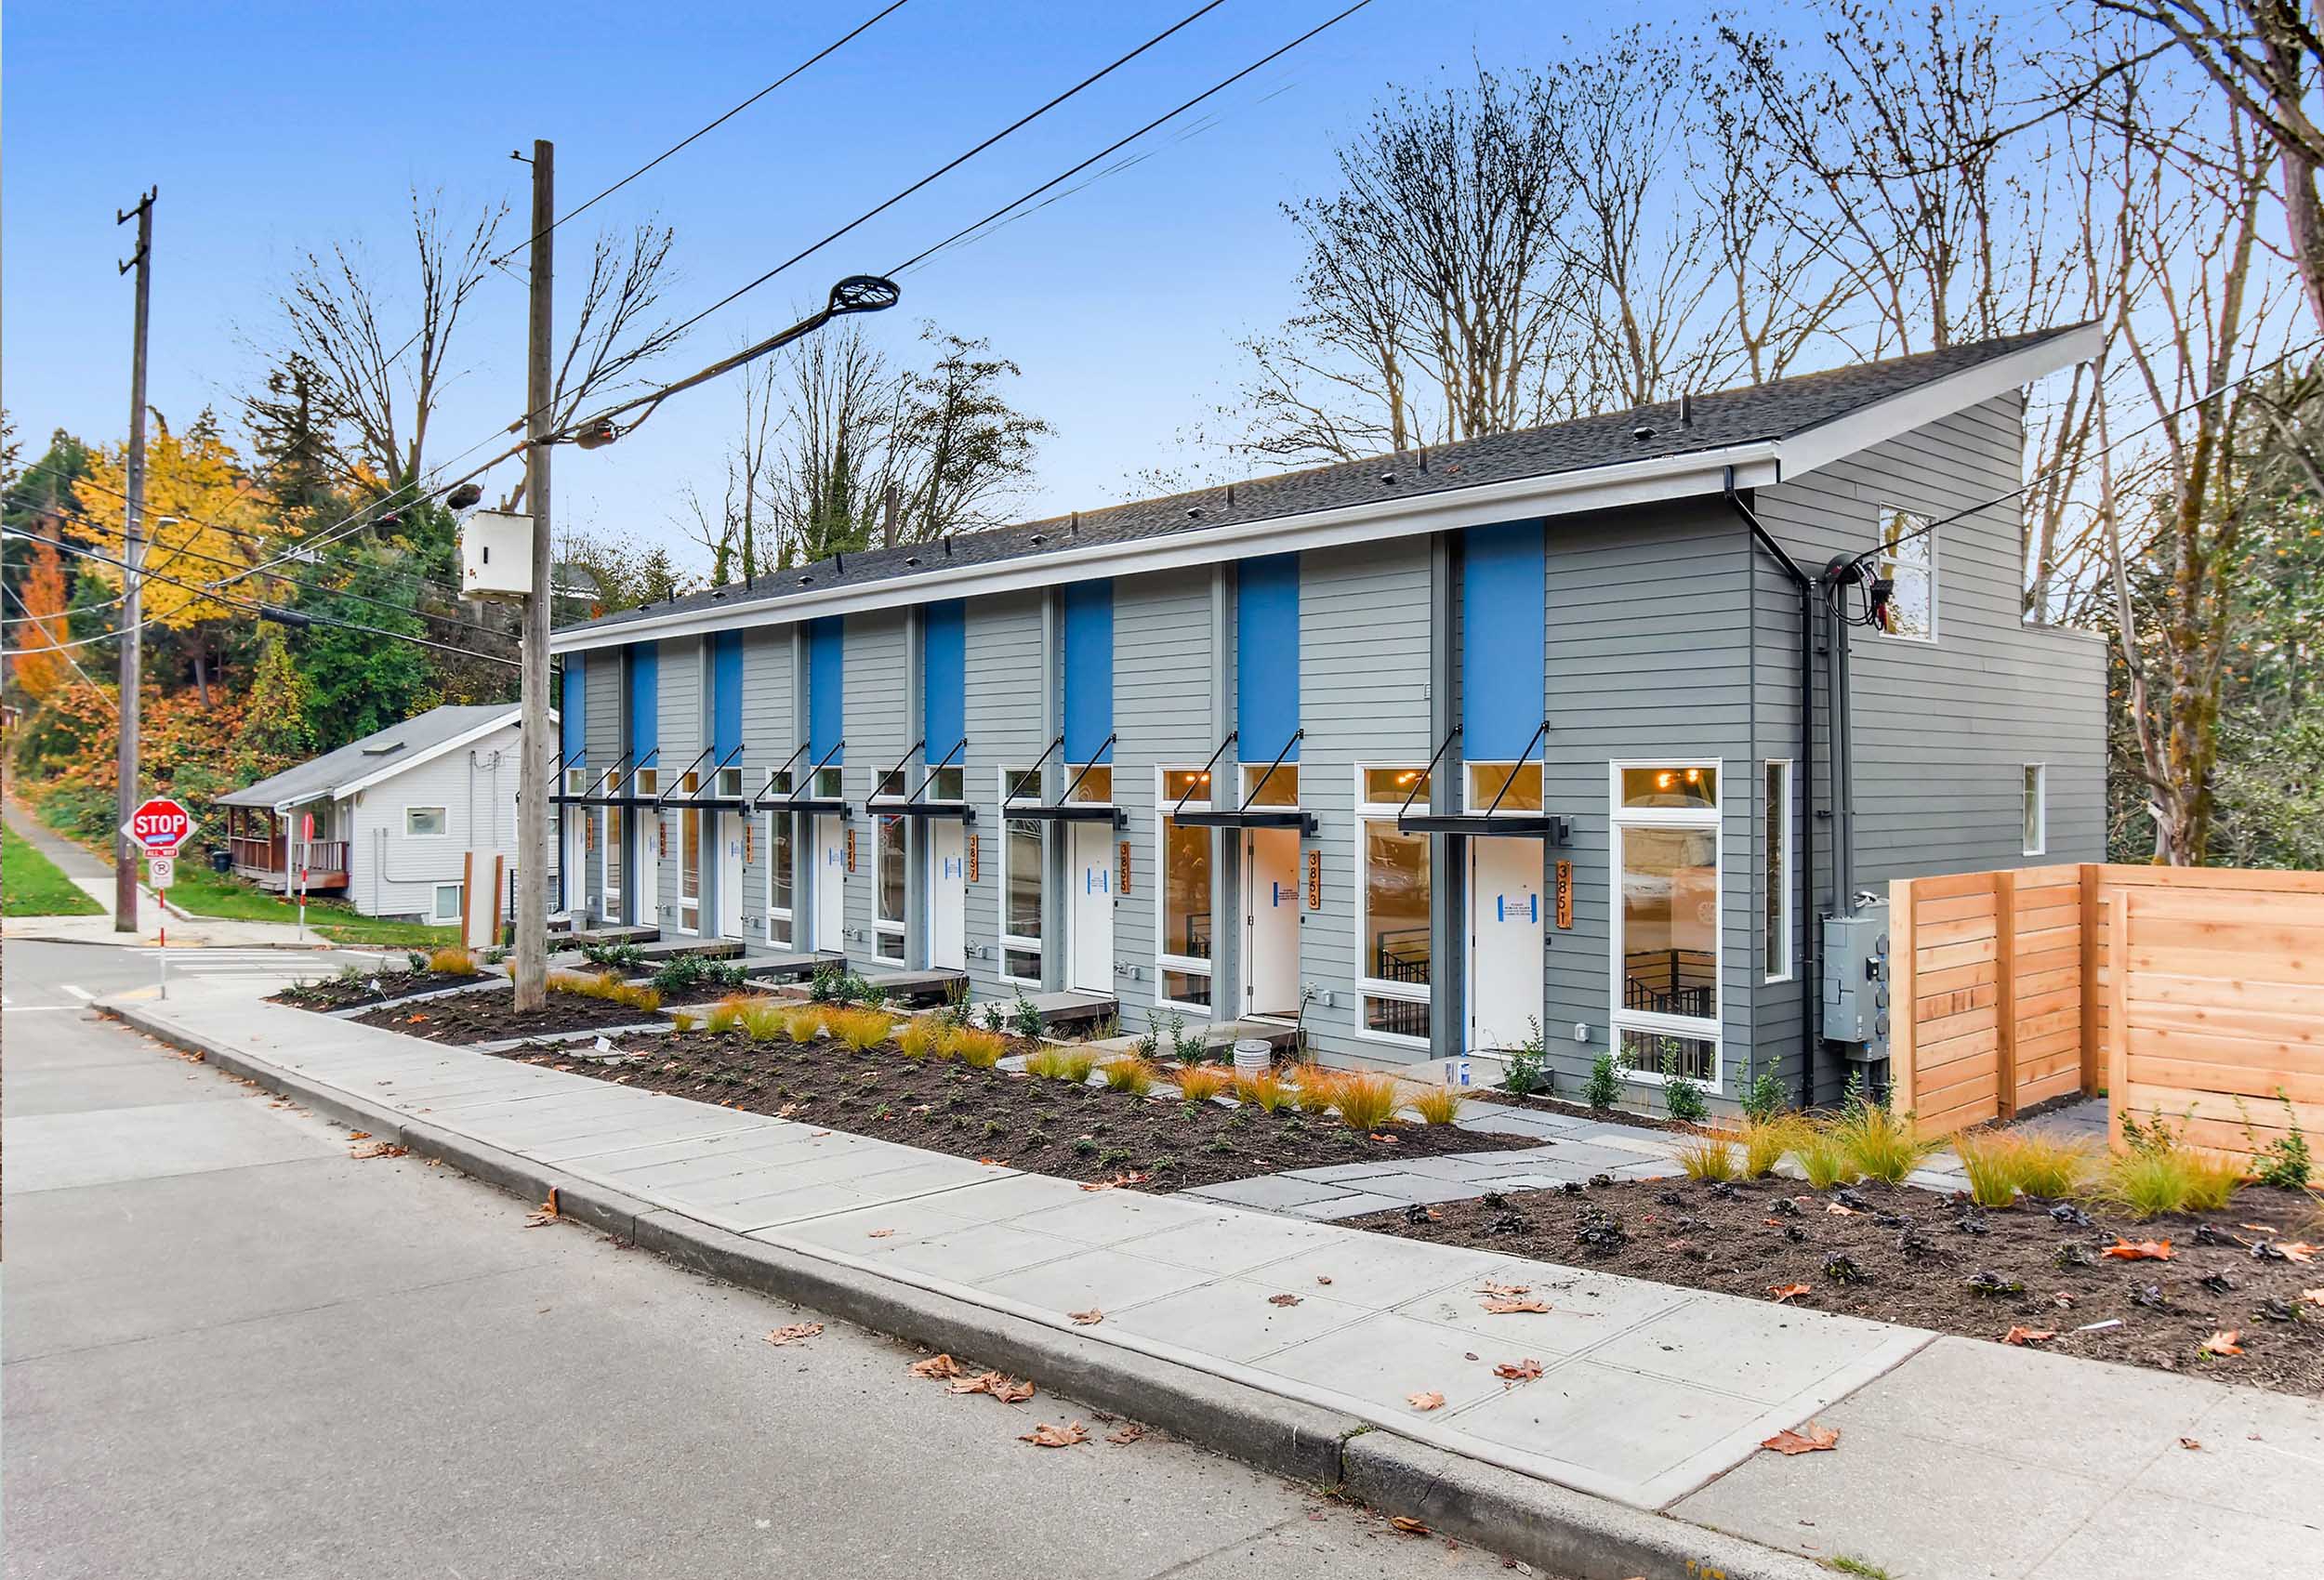 Custom design and construction of an eight micro unit row house located at 3855 21st Ave SW Seattle, WA 98106. Each unit is 600 square feet and was completed in October, 2018.